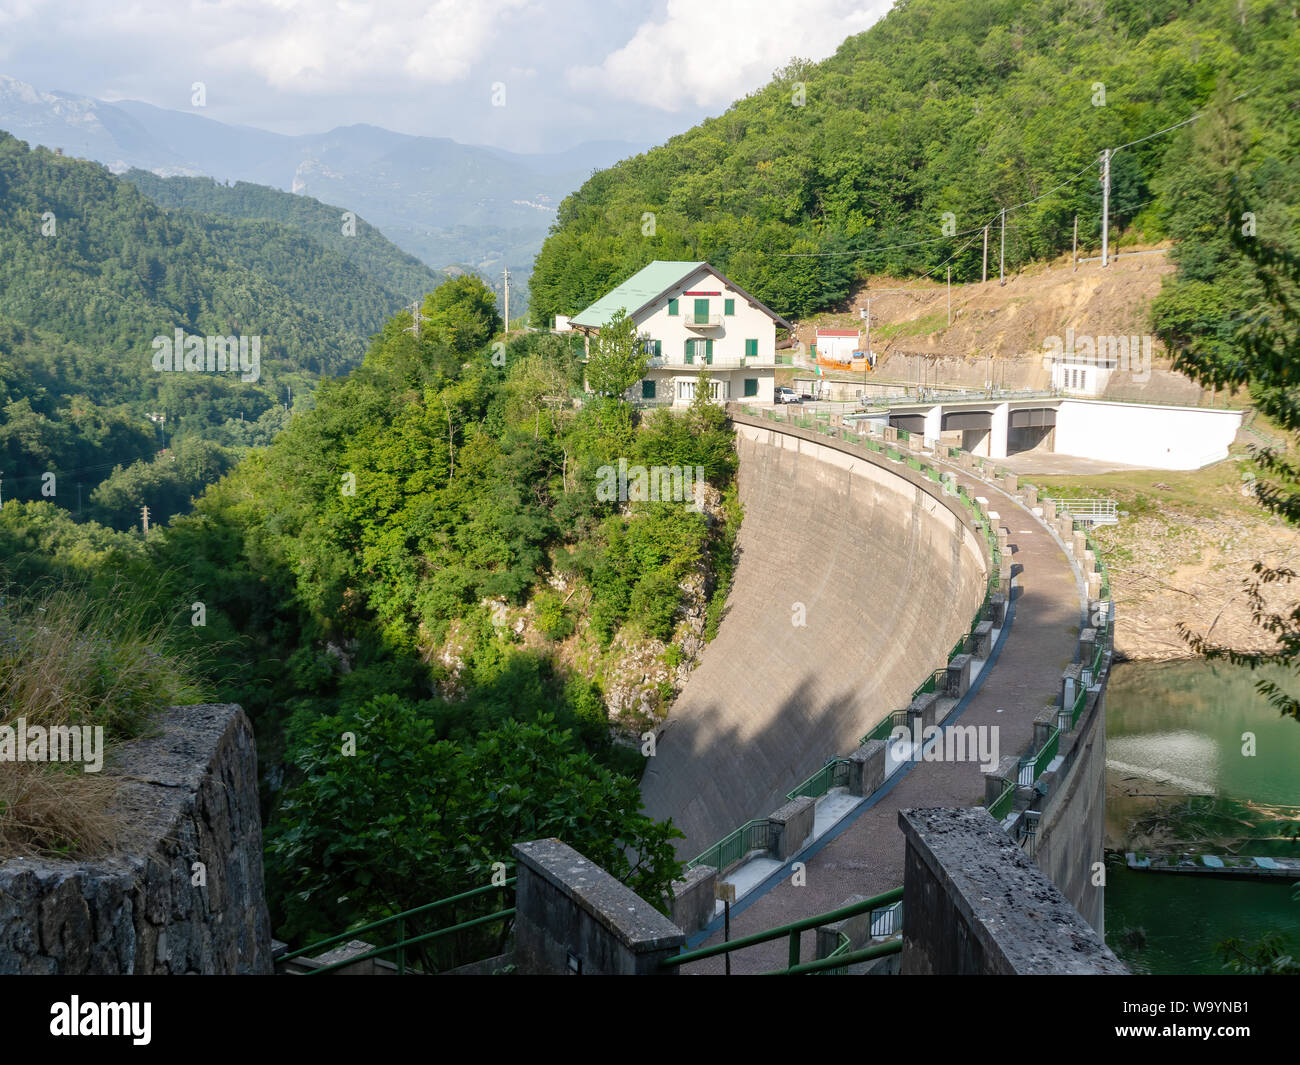 VAGLI SOTTO, LUCCA, ITALY AUGUST 8, 2019: The ENEL dam on Lago Lake Vagli, Garfagnana. Built to provide hydroelectric power, it submerged a village. Stock Photo